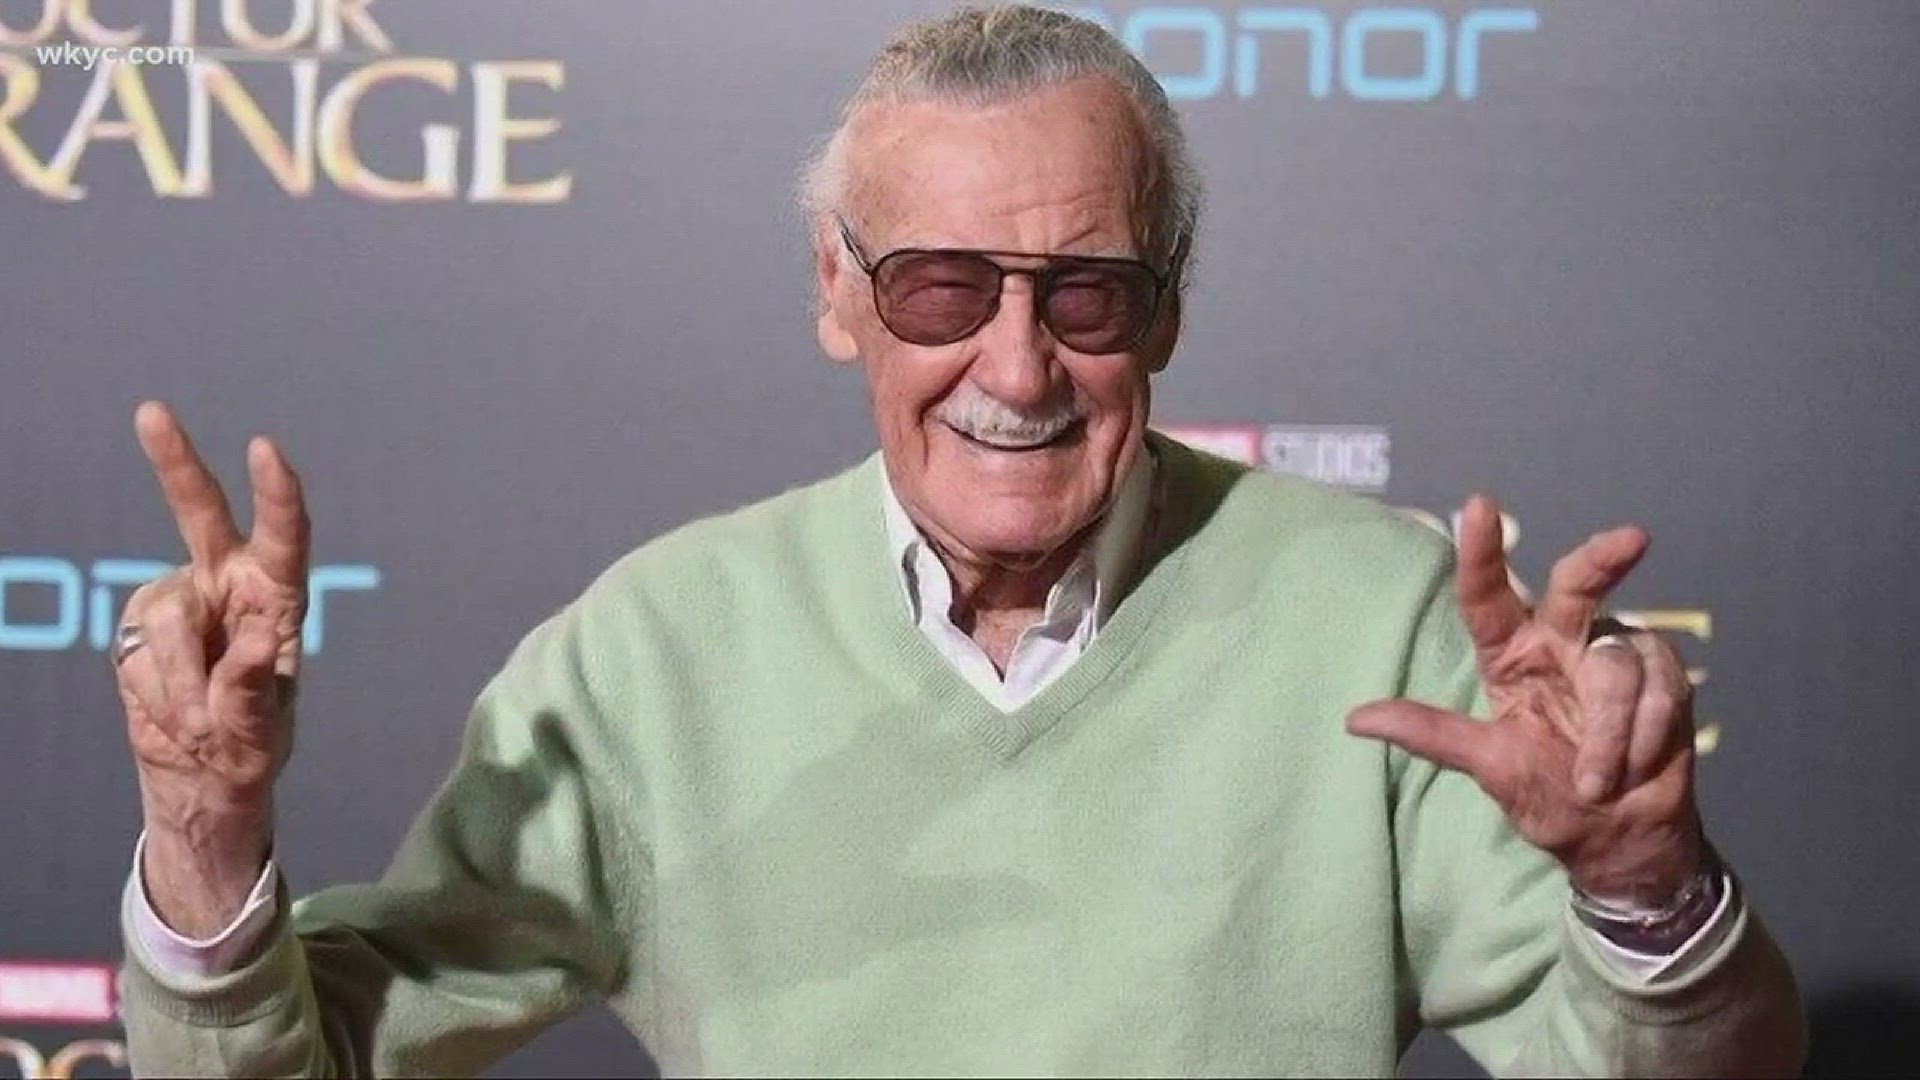 Jan. 18, 2018: The man who created some of the biggest superheroes in comic book history is coming to Cleveland. Stan Lee was just announced as a featured guest at the third annual Wizard World Comic Con event at the Huntington Convention Center in downto